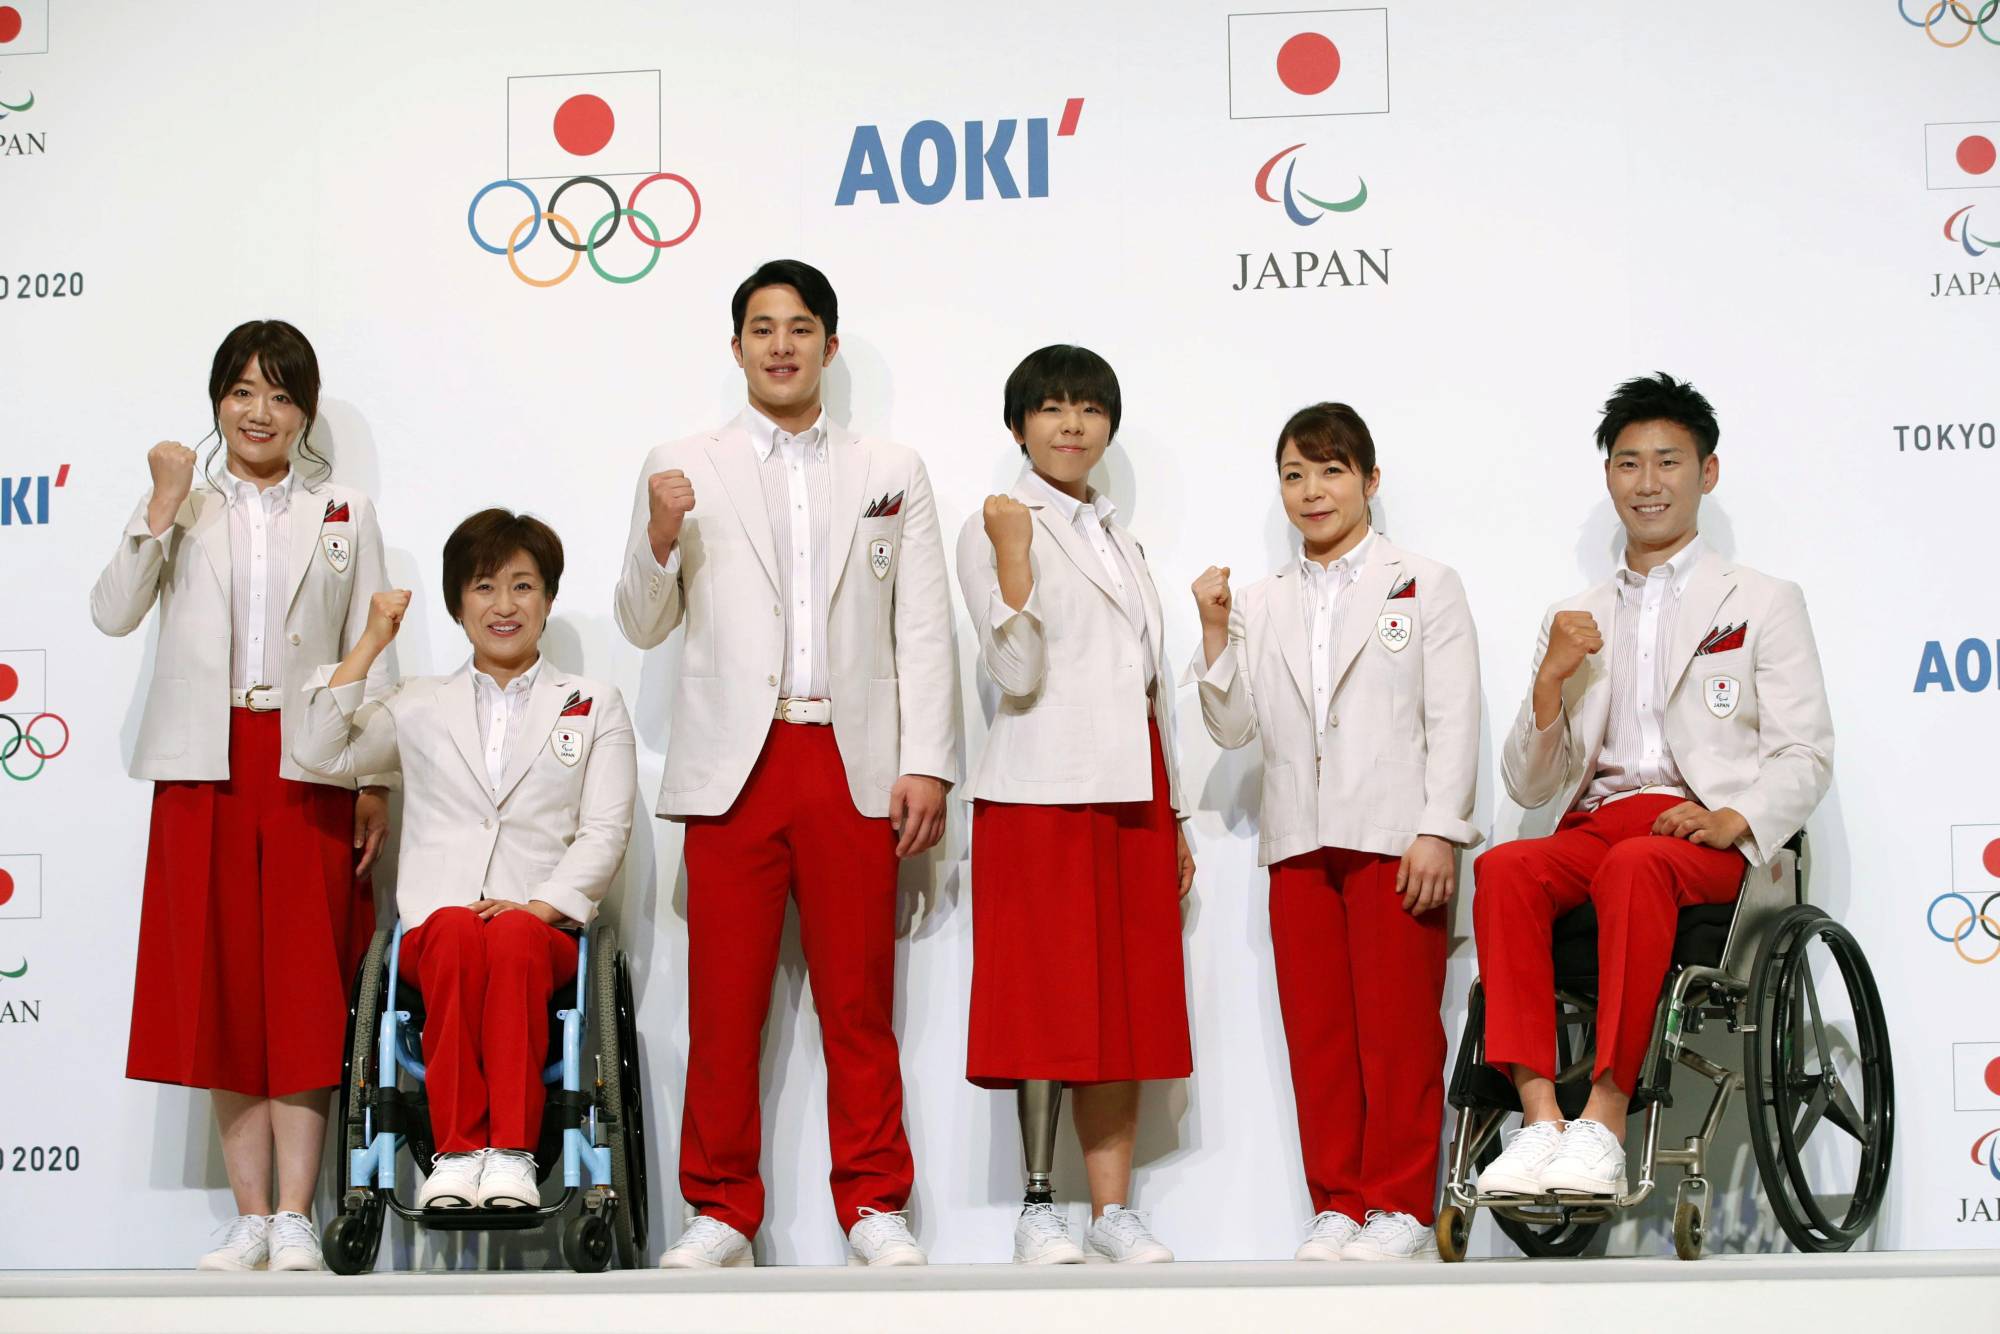 Japanese athletes model the Tokyo Olympics uniforms, which are a riff on the colors and design of the country’s 1964 uniforms. | KYODO / VIA REUTERS